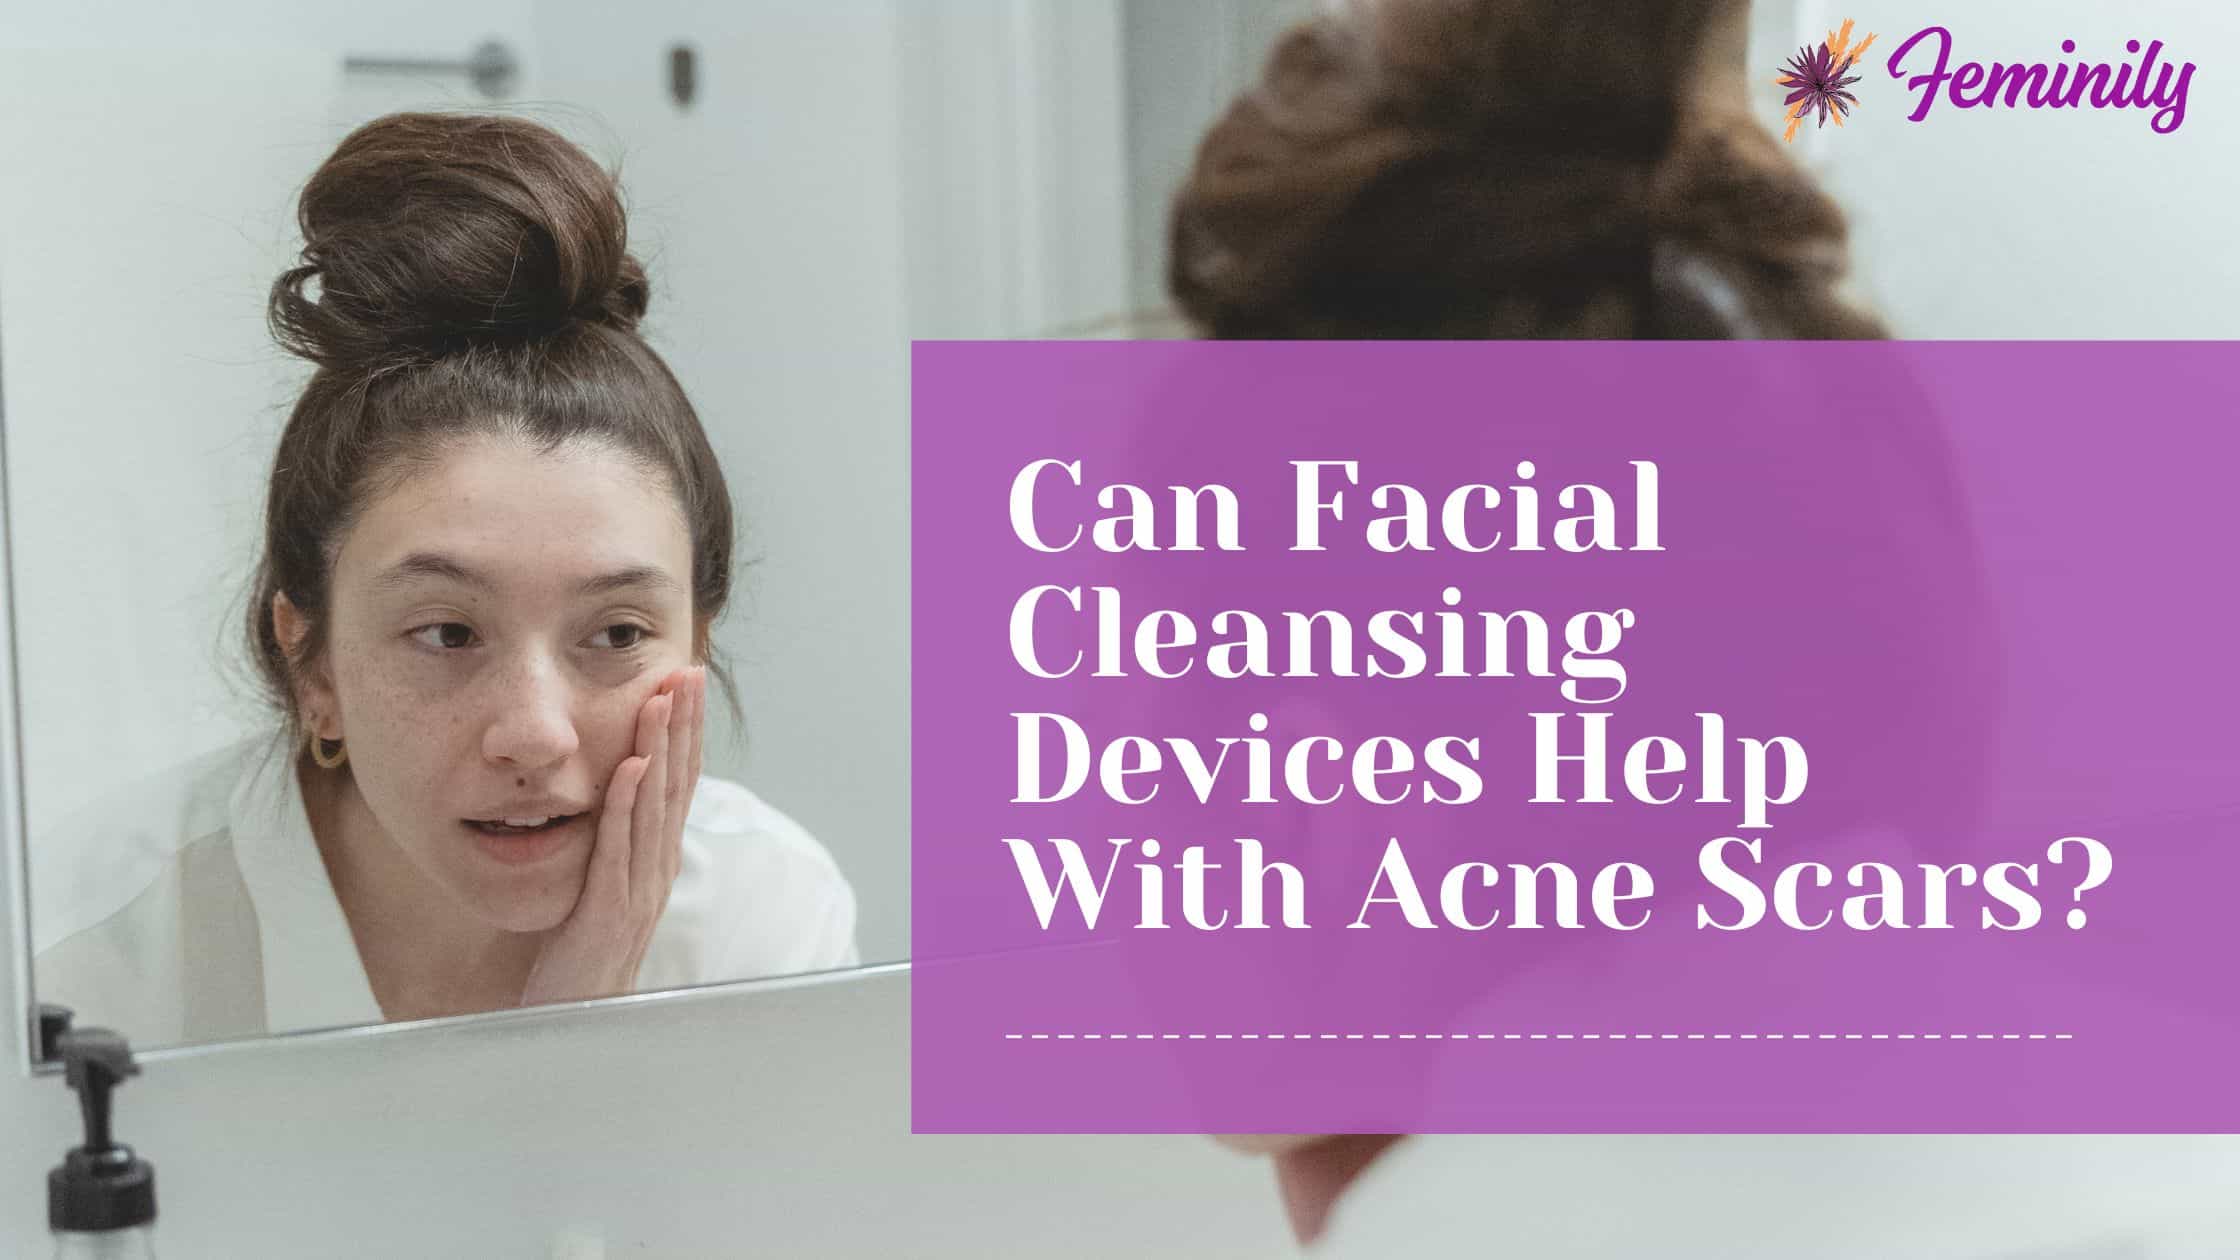 Can facial cleansing devices help with acne scars